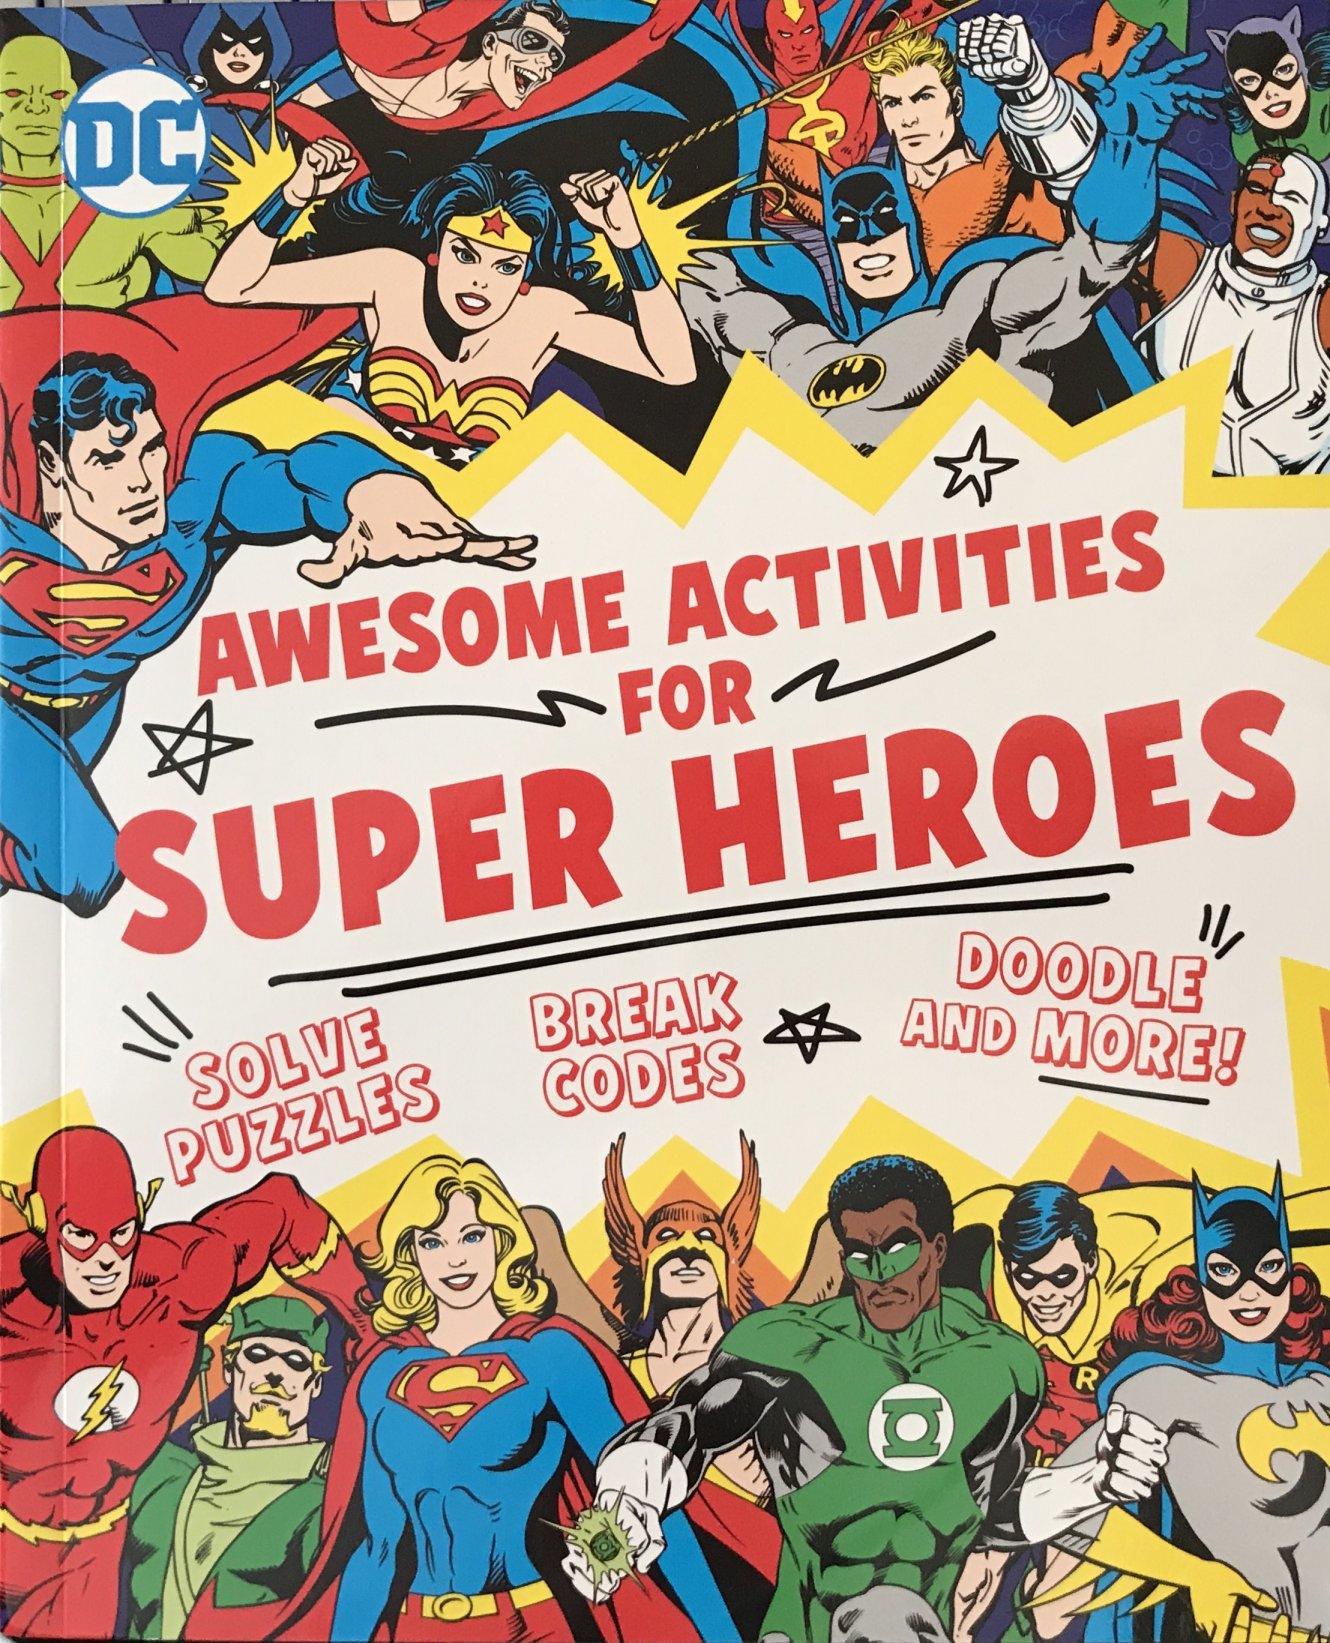 My First Dictionary and Awesome Activities for Super Heroes - Excellent and heroic reference books